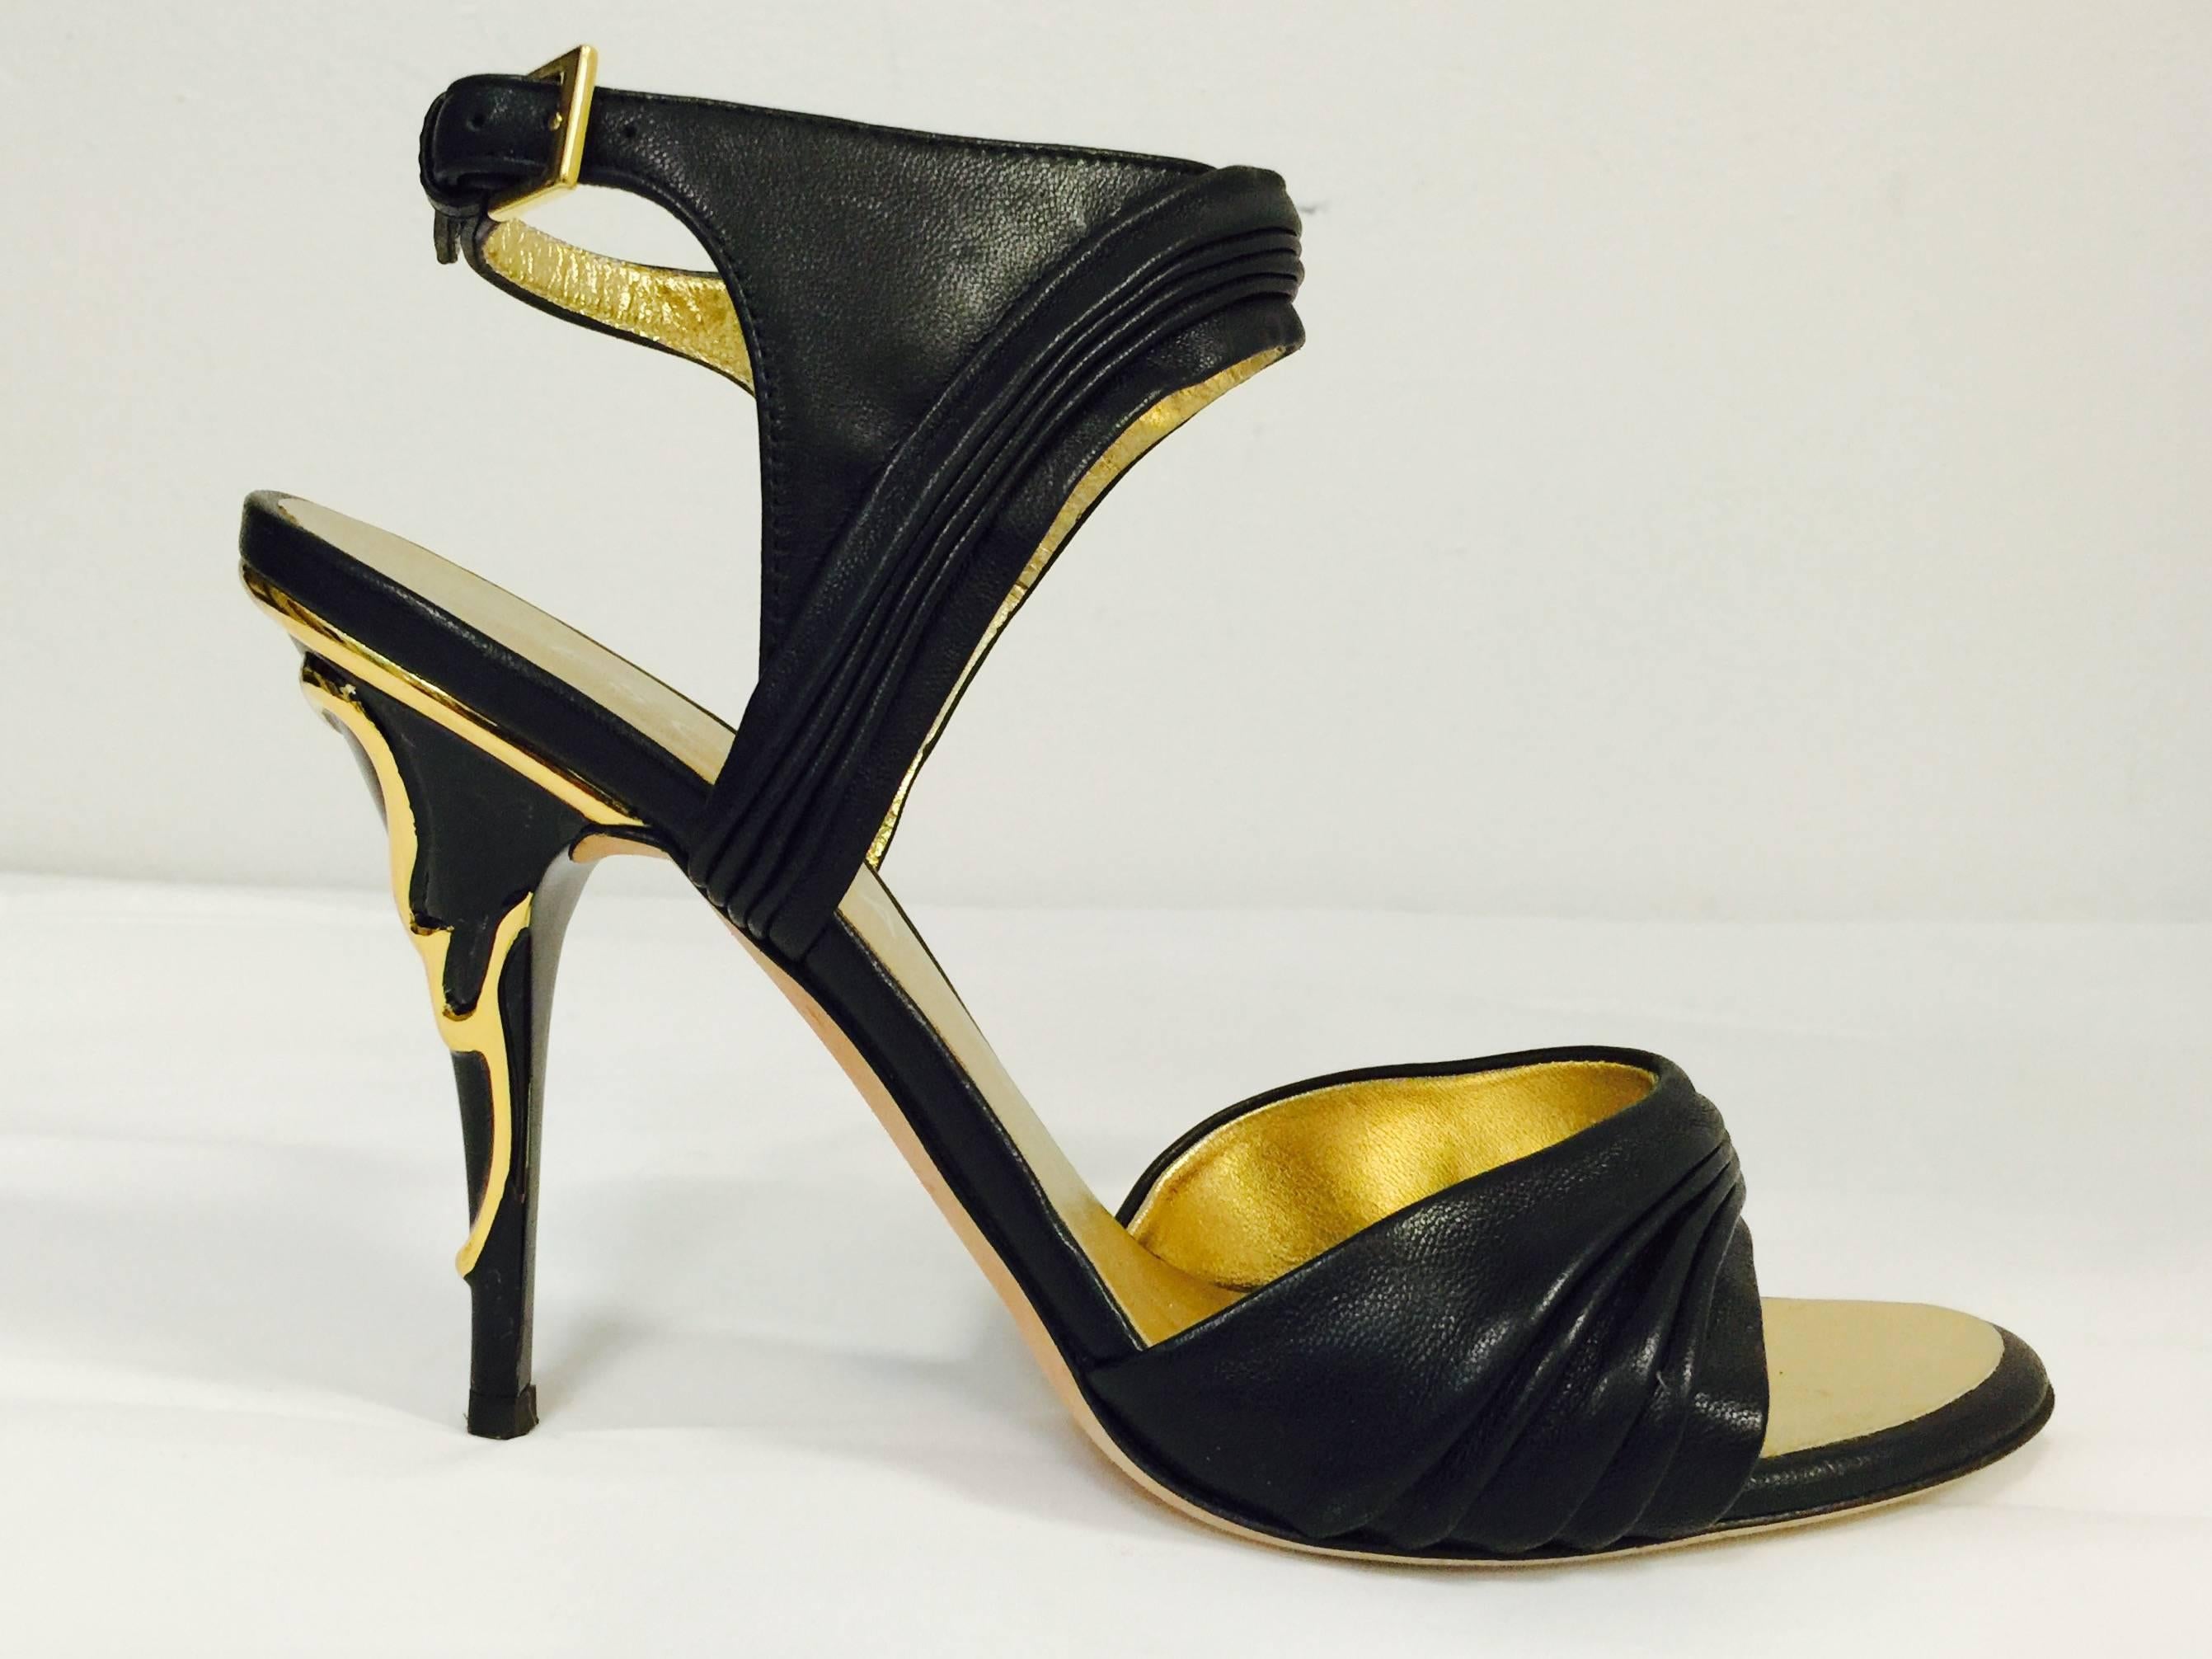 New Escada Evening Sandals promise an unforgettable entrance and exit!  Features butter soft black leather that has been gathered and pleated on the vamps and adjustable ankle straps.  Fully lined in metallic gold leather!  The showstopper?  Black